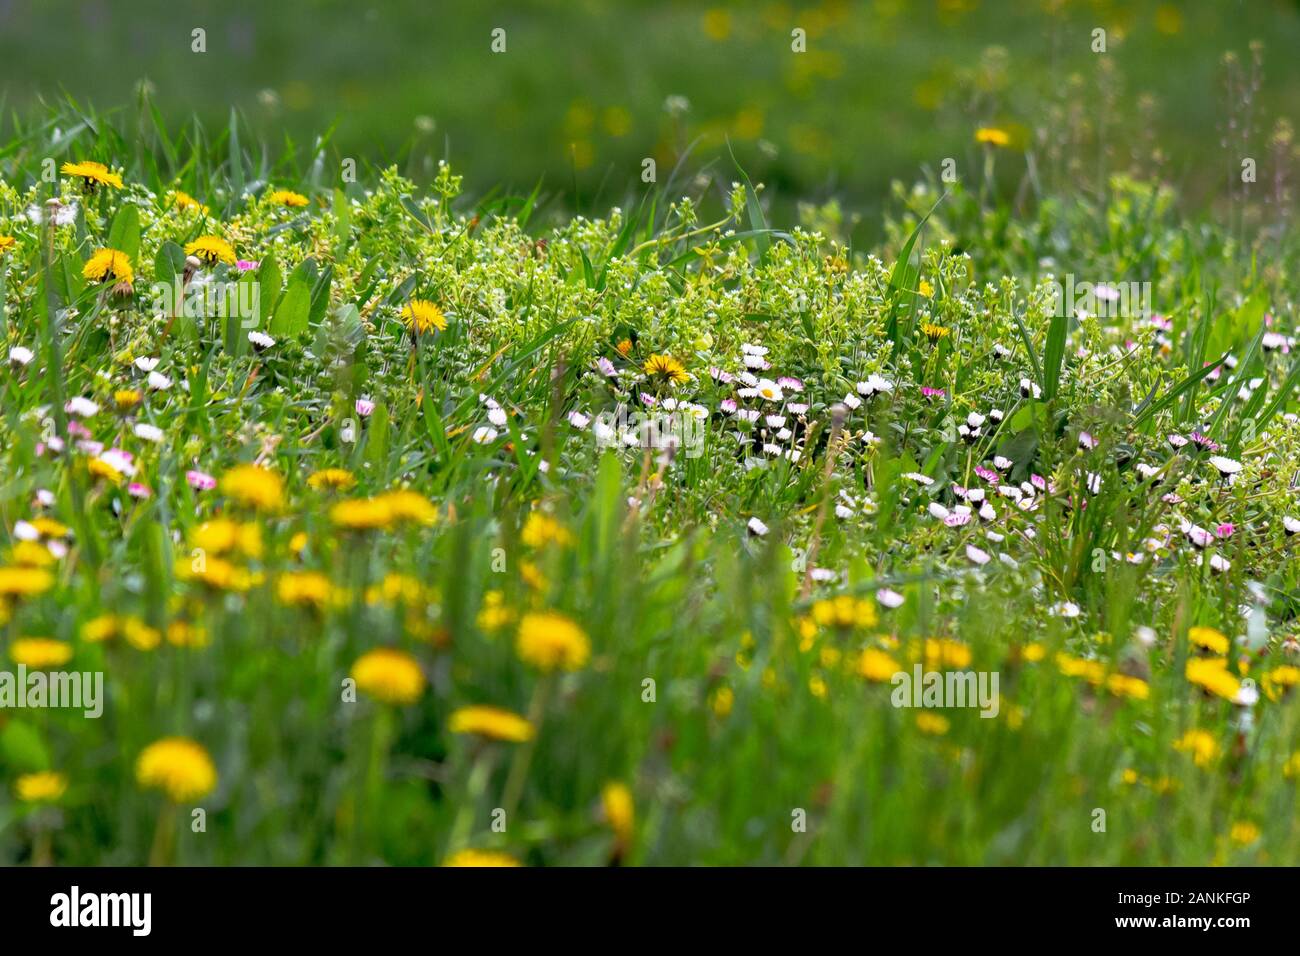 dandelions and other weeds among the grass. an overgrown backyard needs clearing. springtime lawn care concept Stock Photo